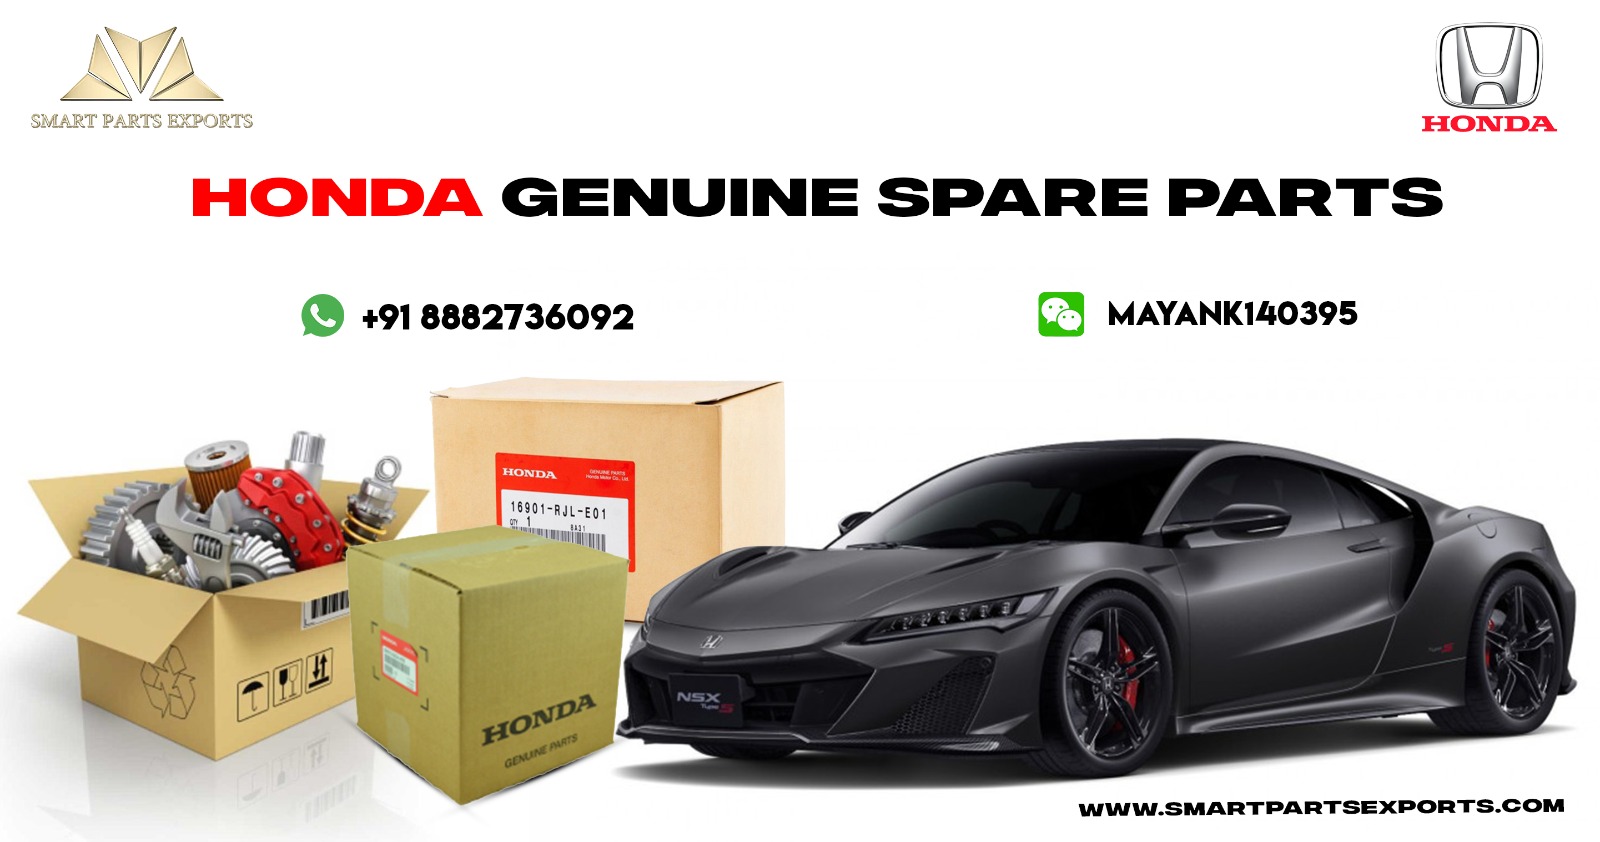 Find Honda Spare Parts & Accessories at the best prices